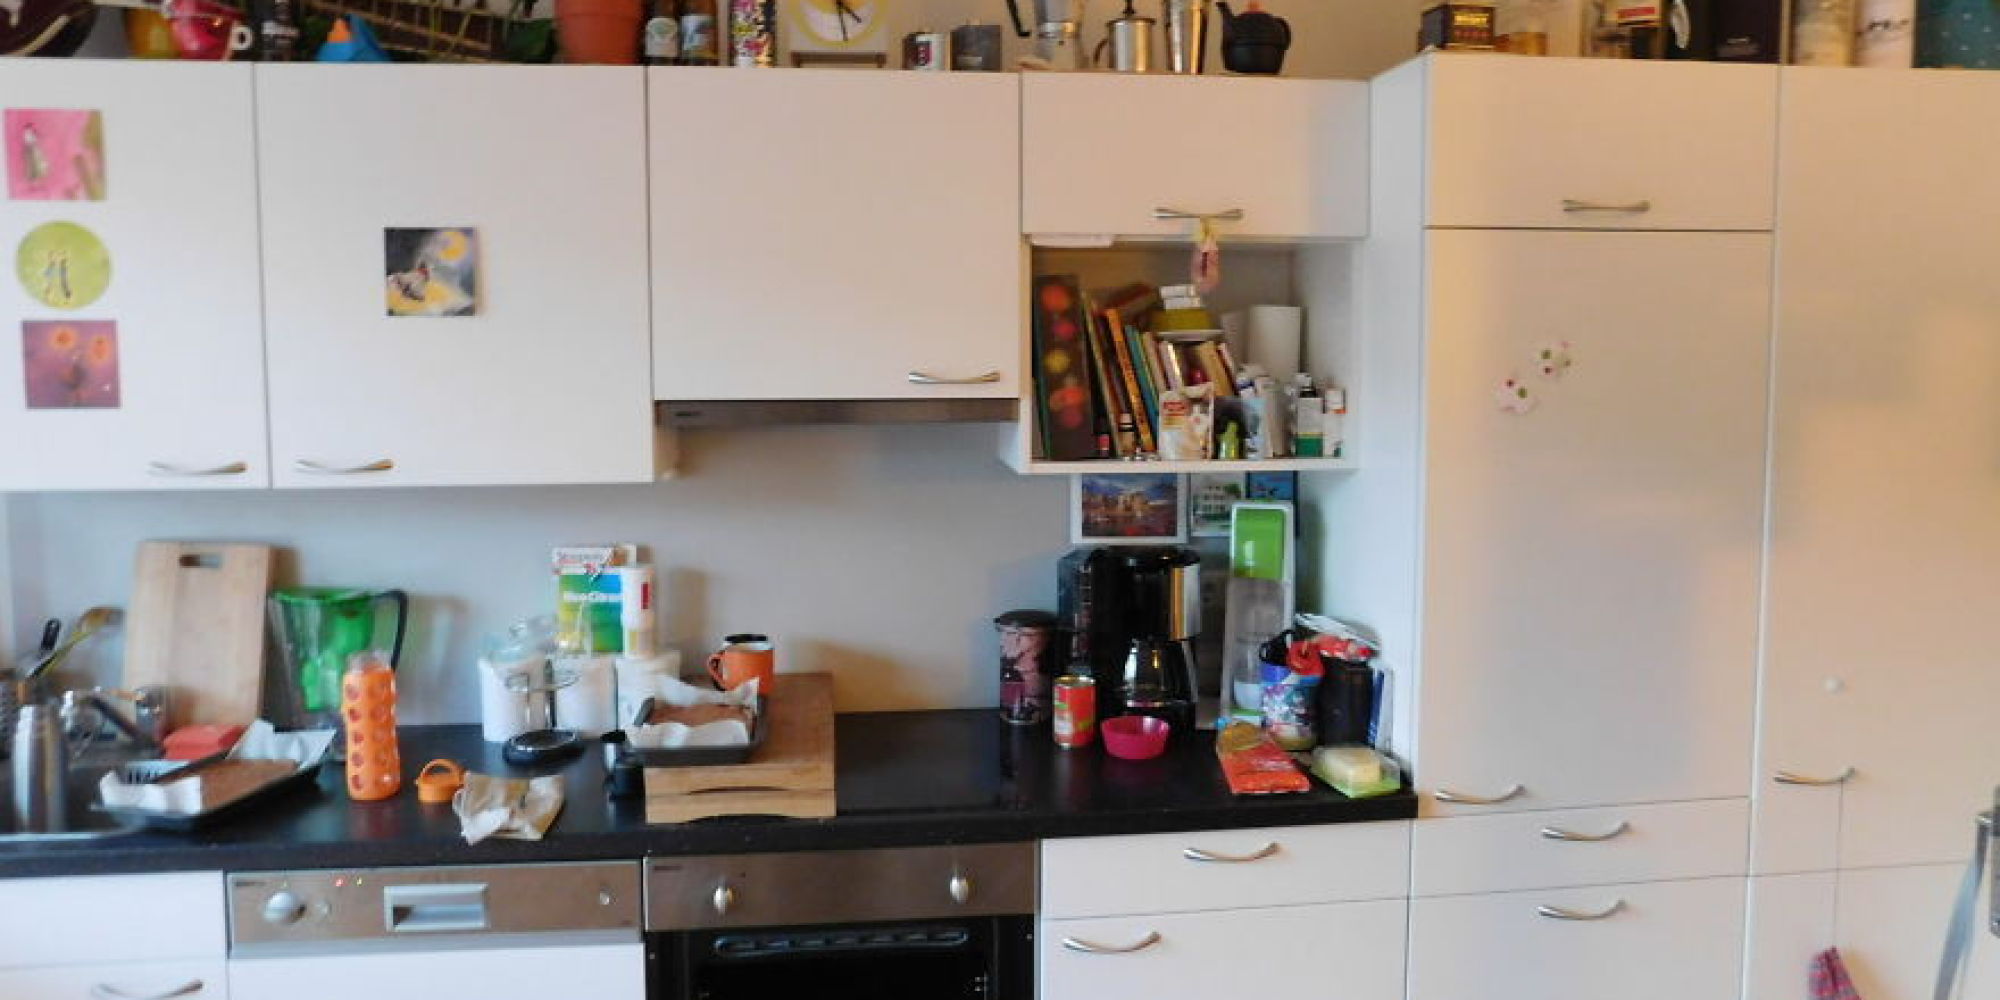 Can You Find The Cat In This Picture? | HuffPost UK